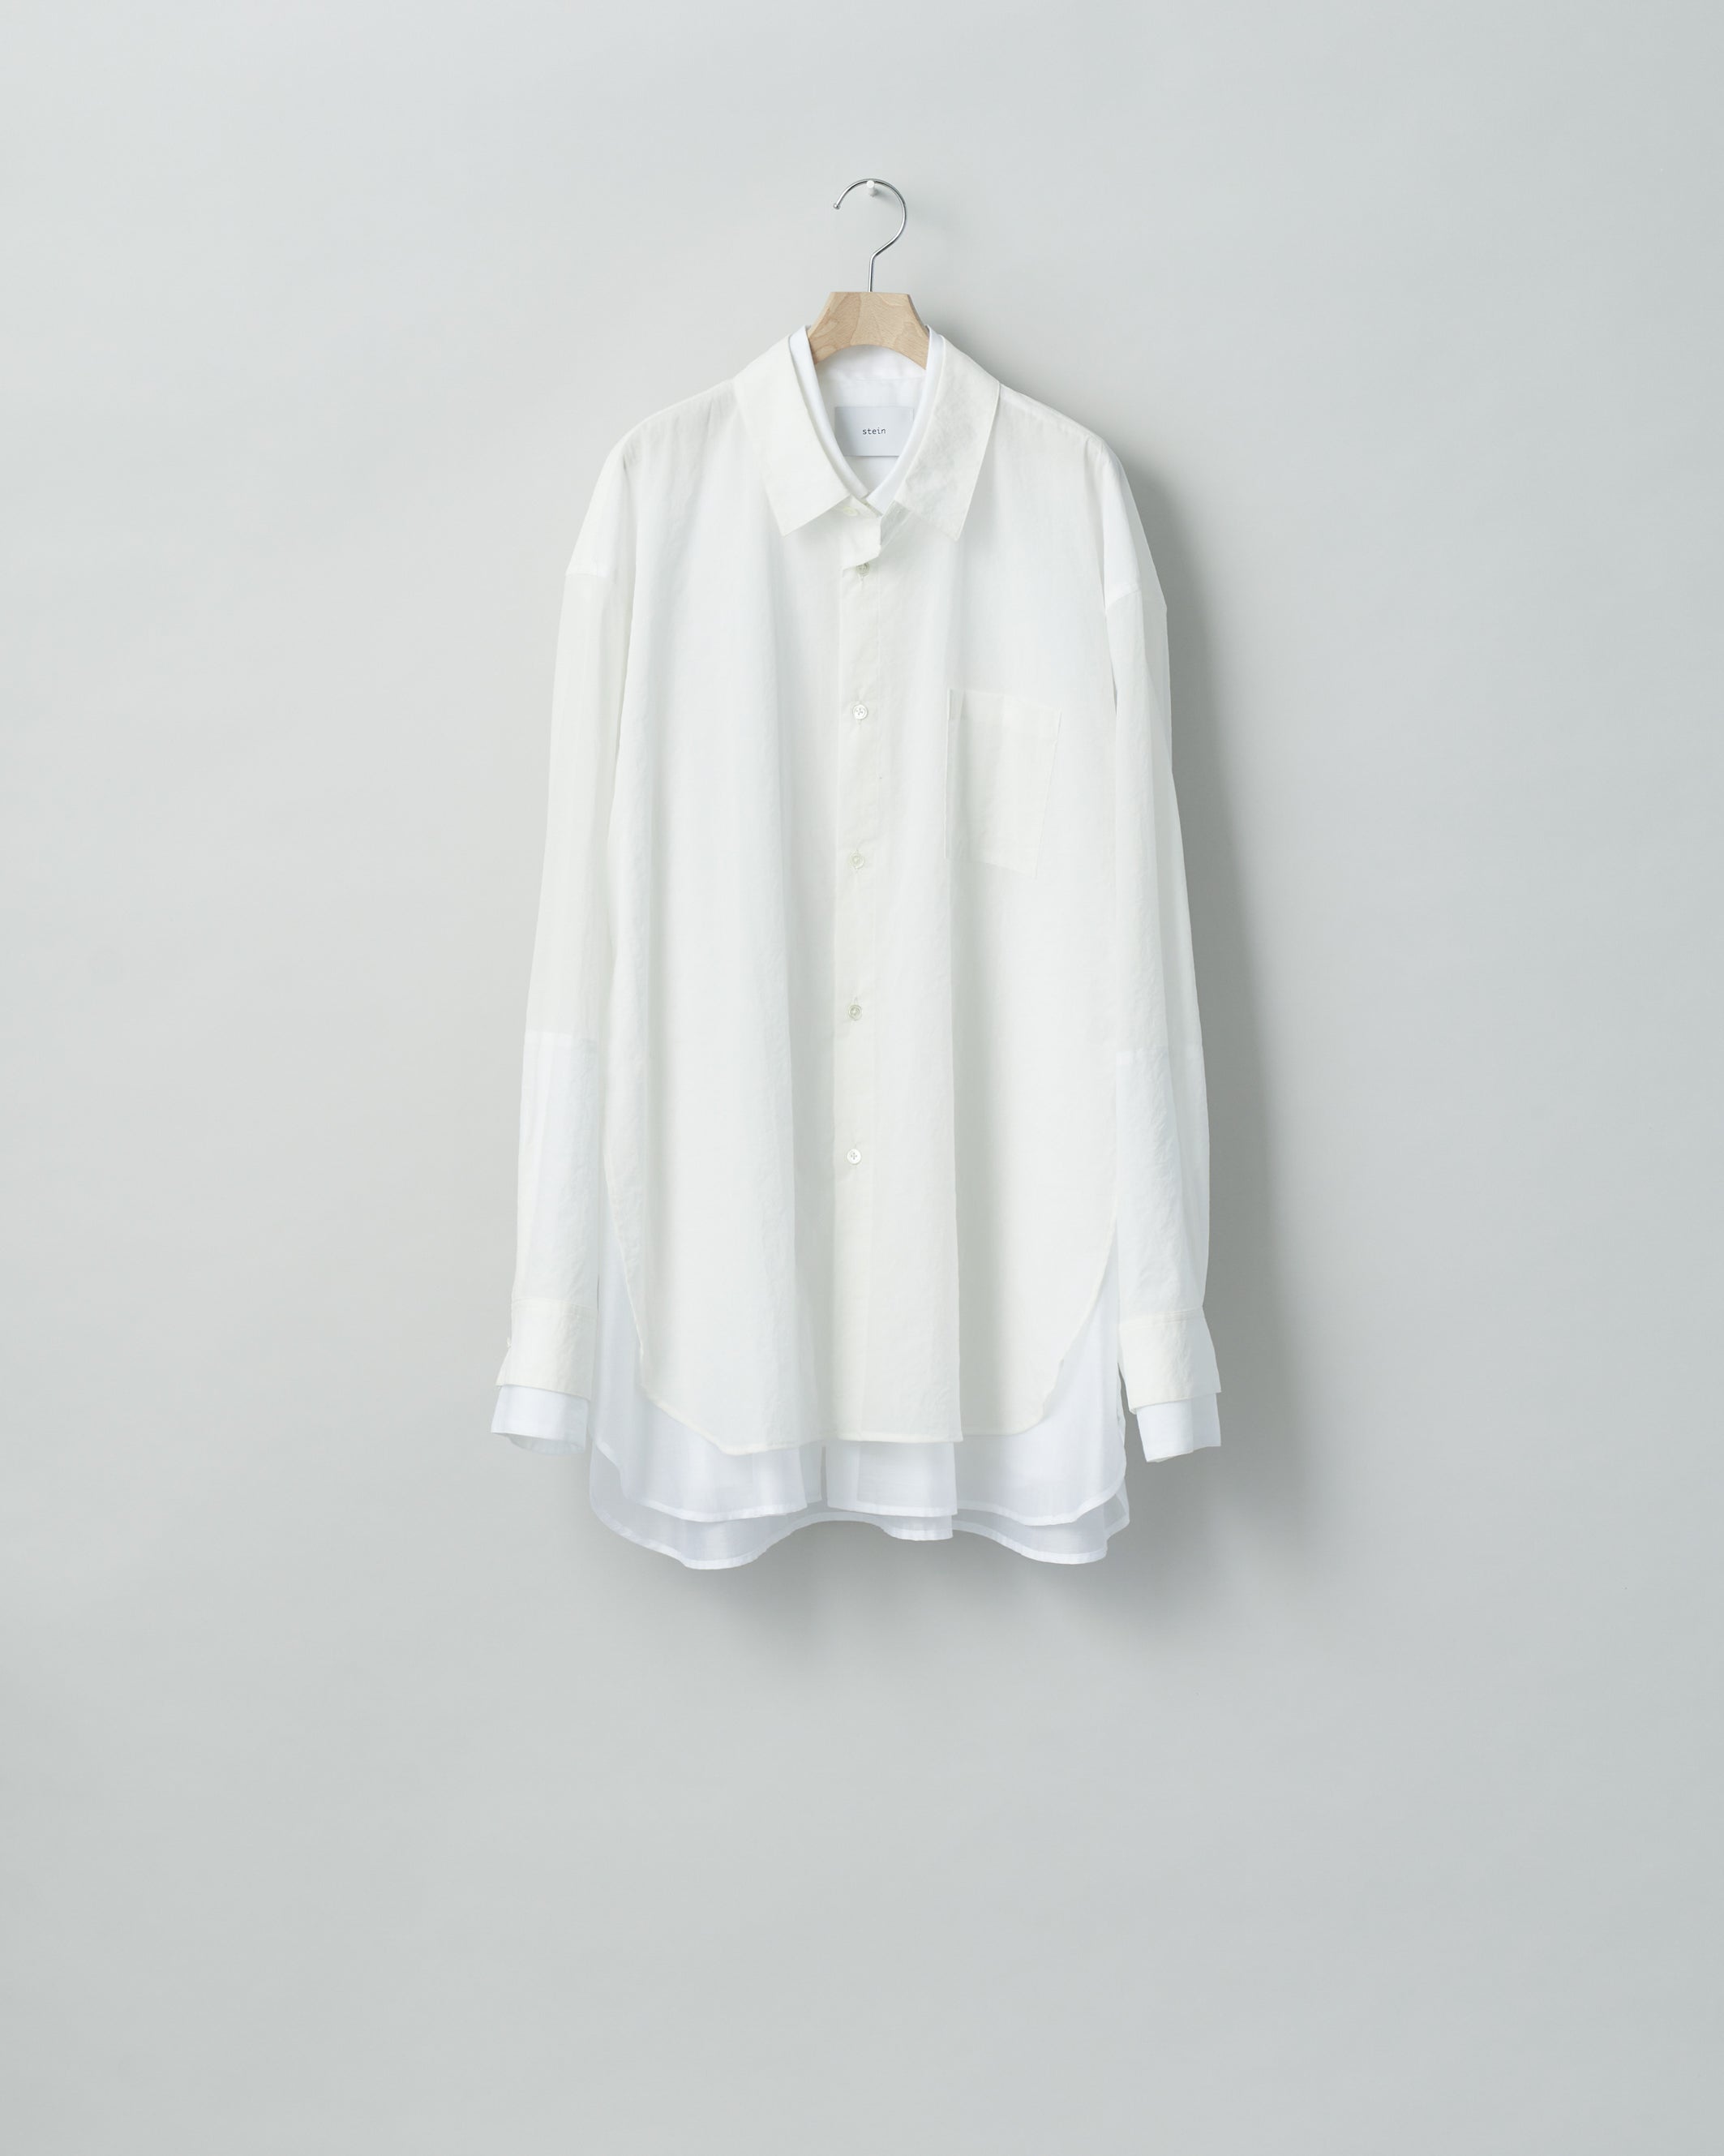 stein / OVERSIZED LAYERED SHIRT (TL) "OFF" – feets